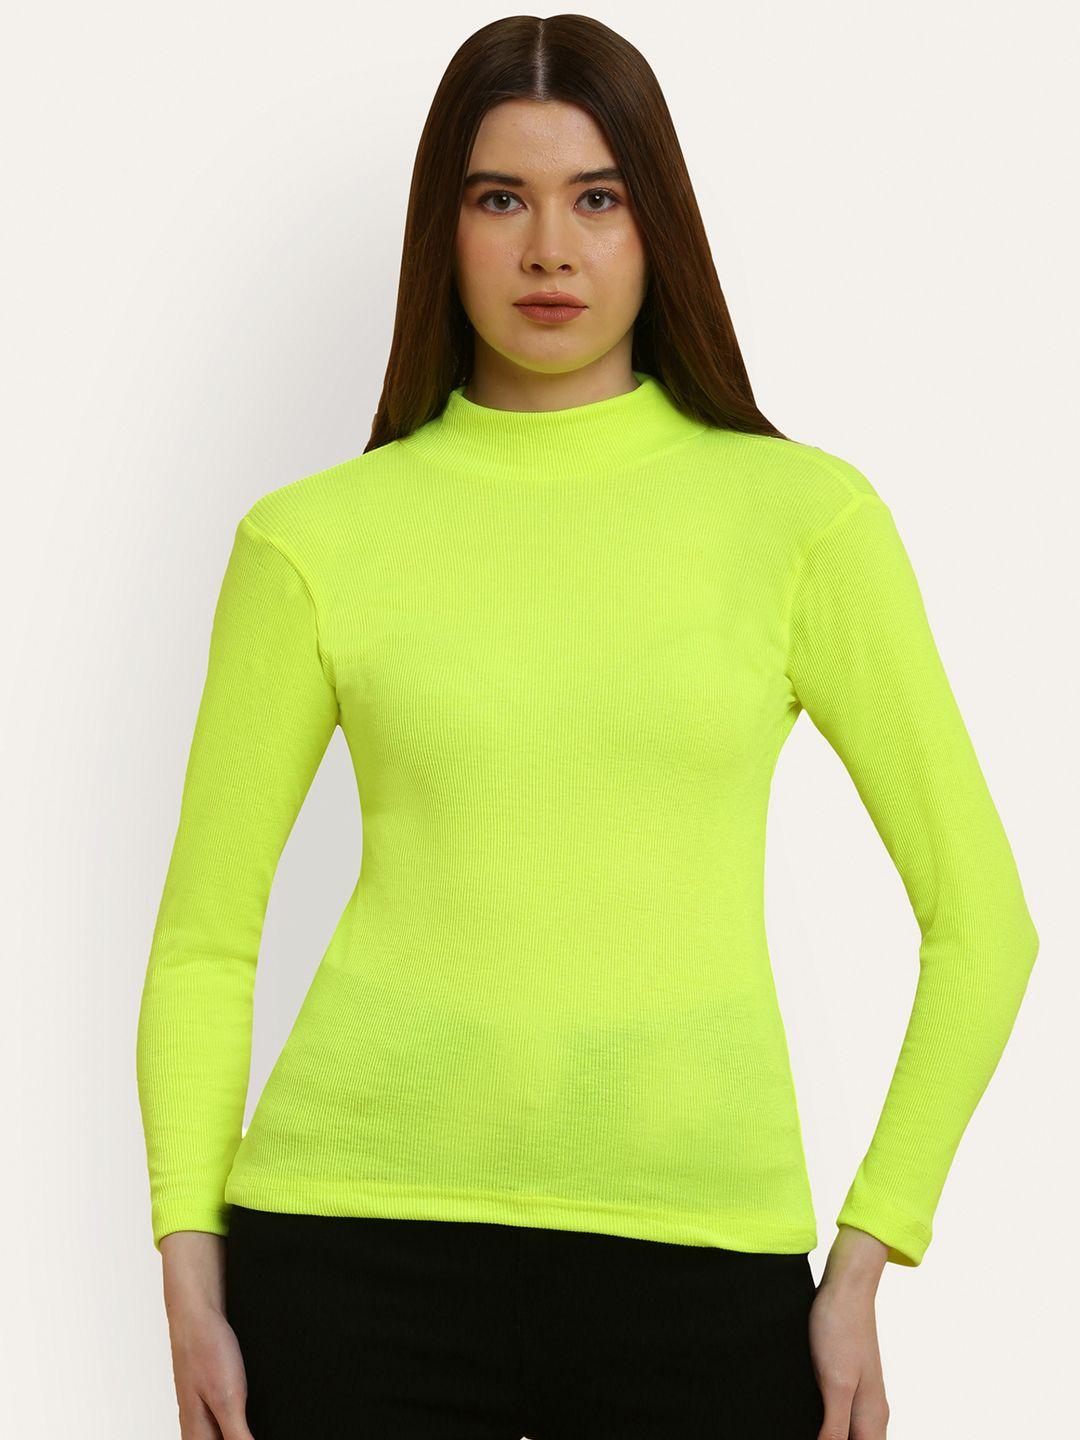 miaz-lifestyle-high-neck-long-sleeves-cotton-top